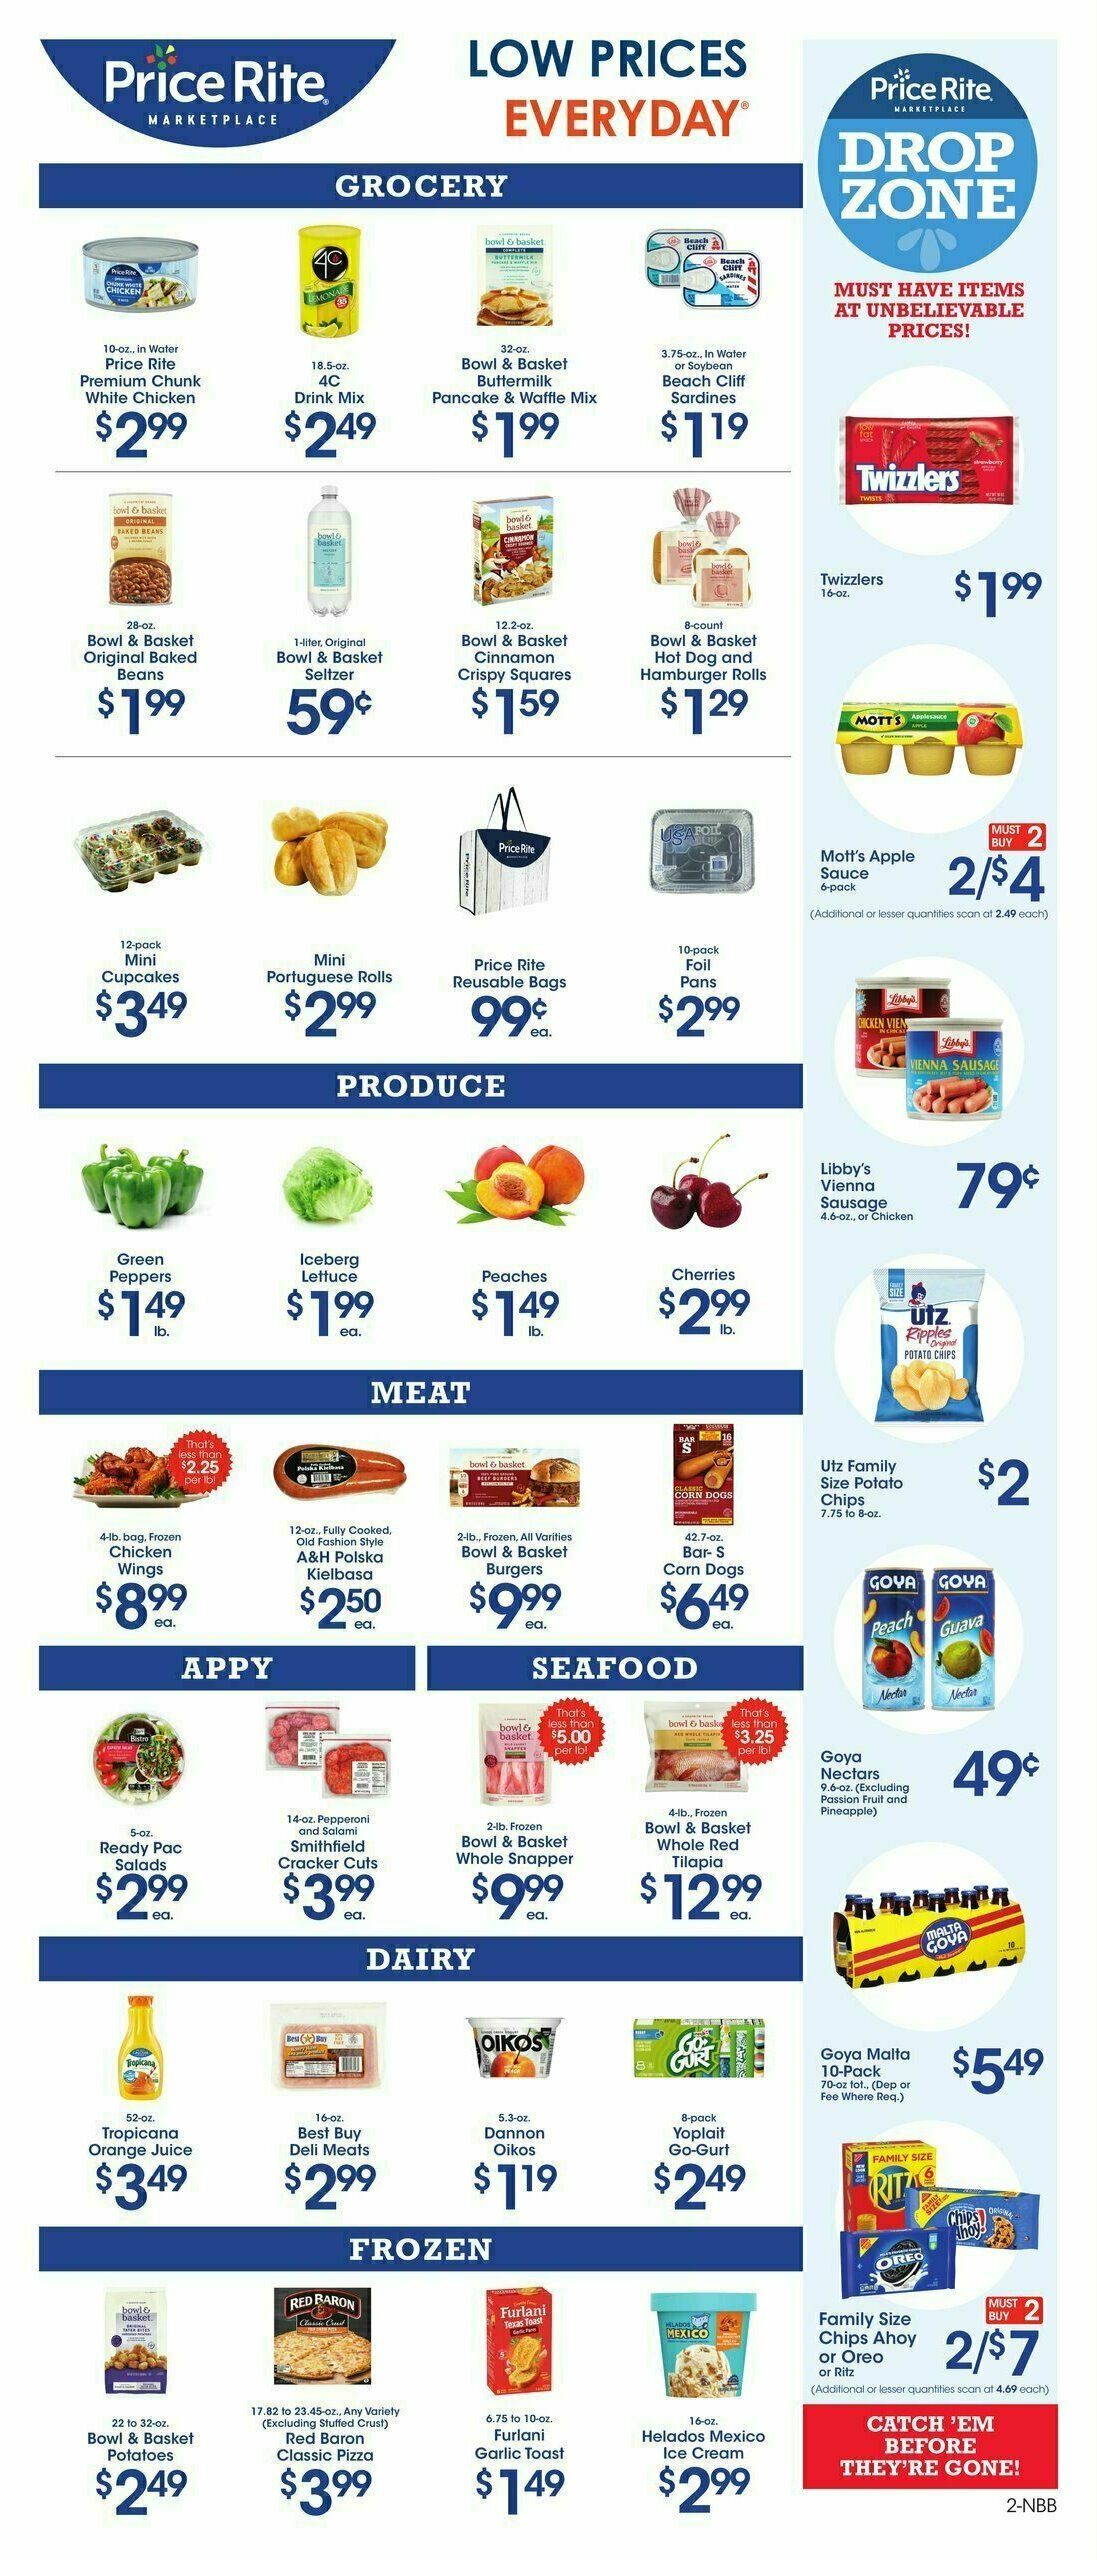 Price Rite Weekly Ad from July 7